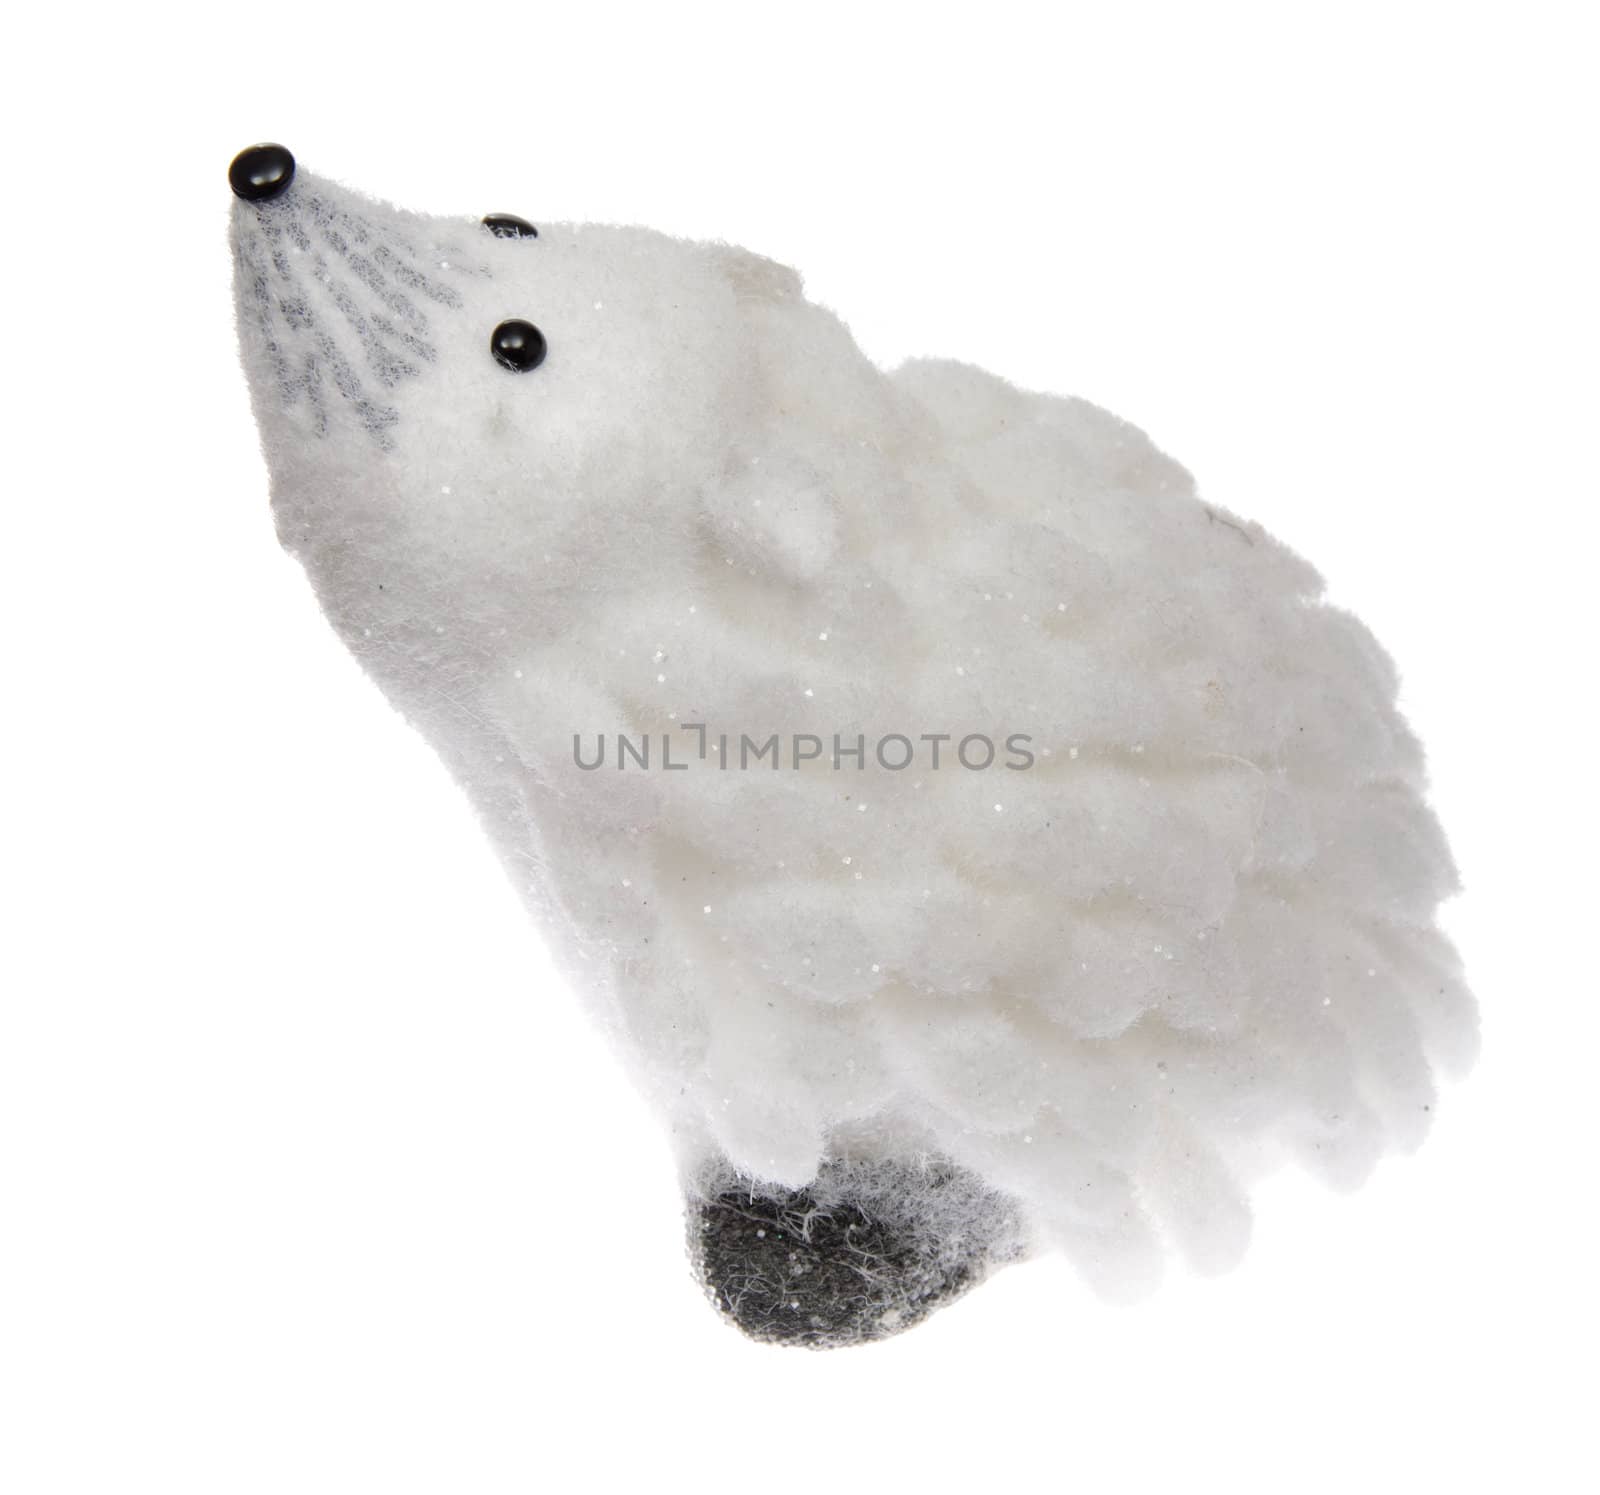 small hedgehog toy isolated over white background